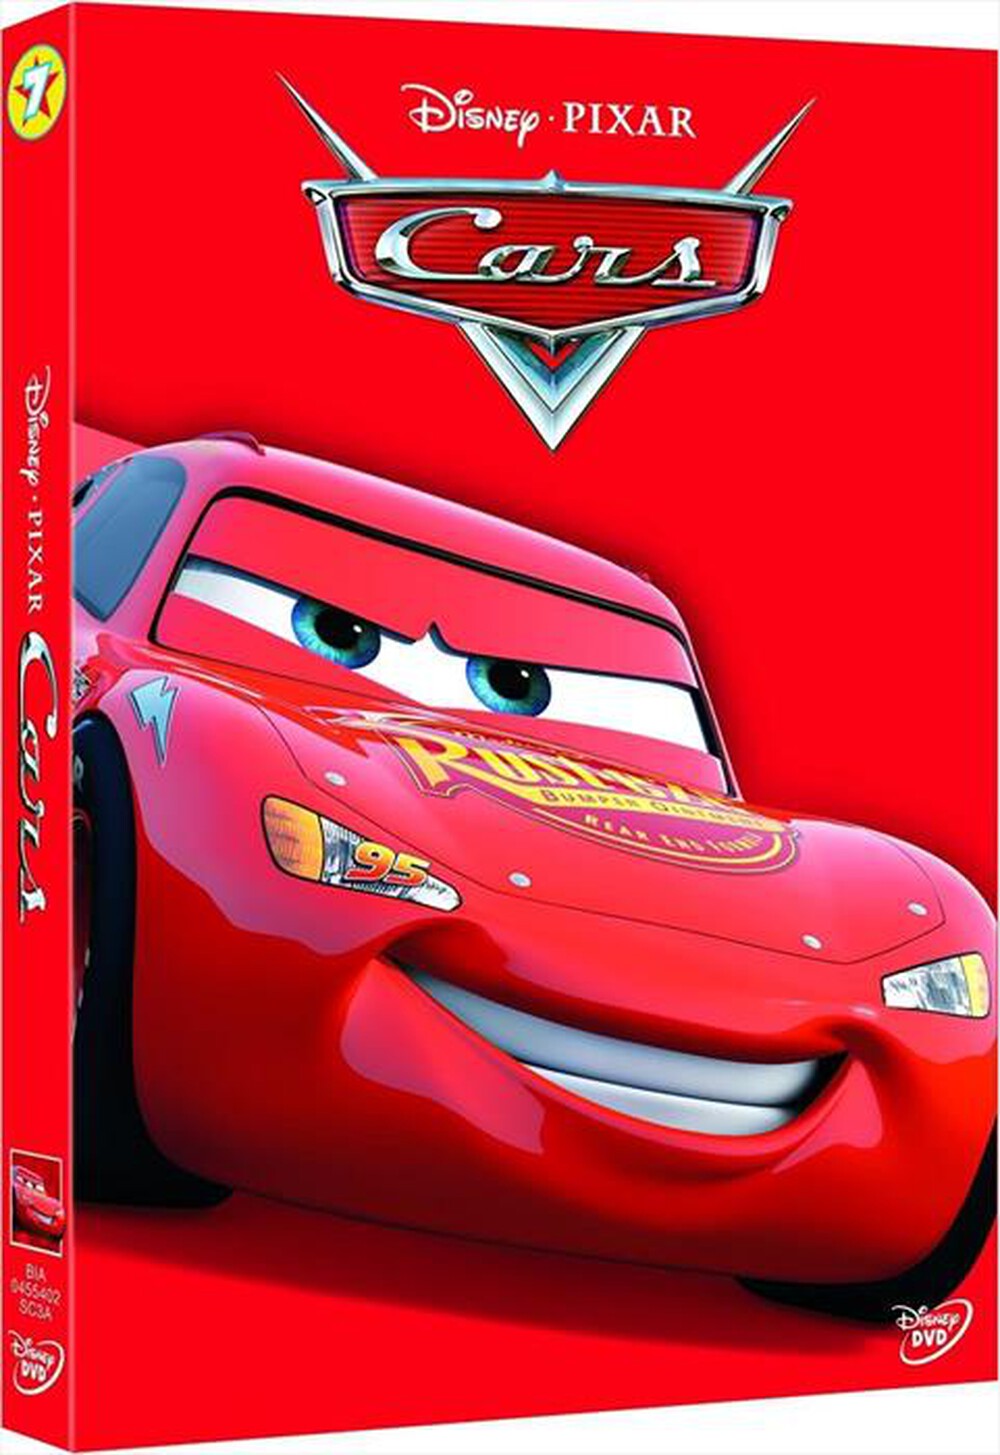 "EAGLE PICTURES - Cars (Special Edition)"